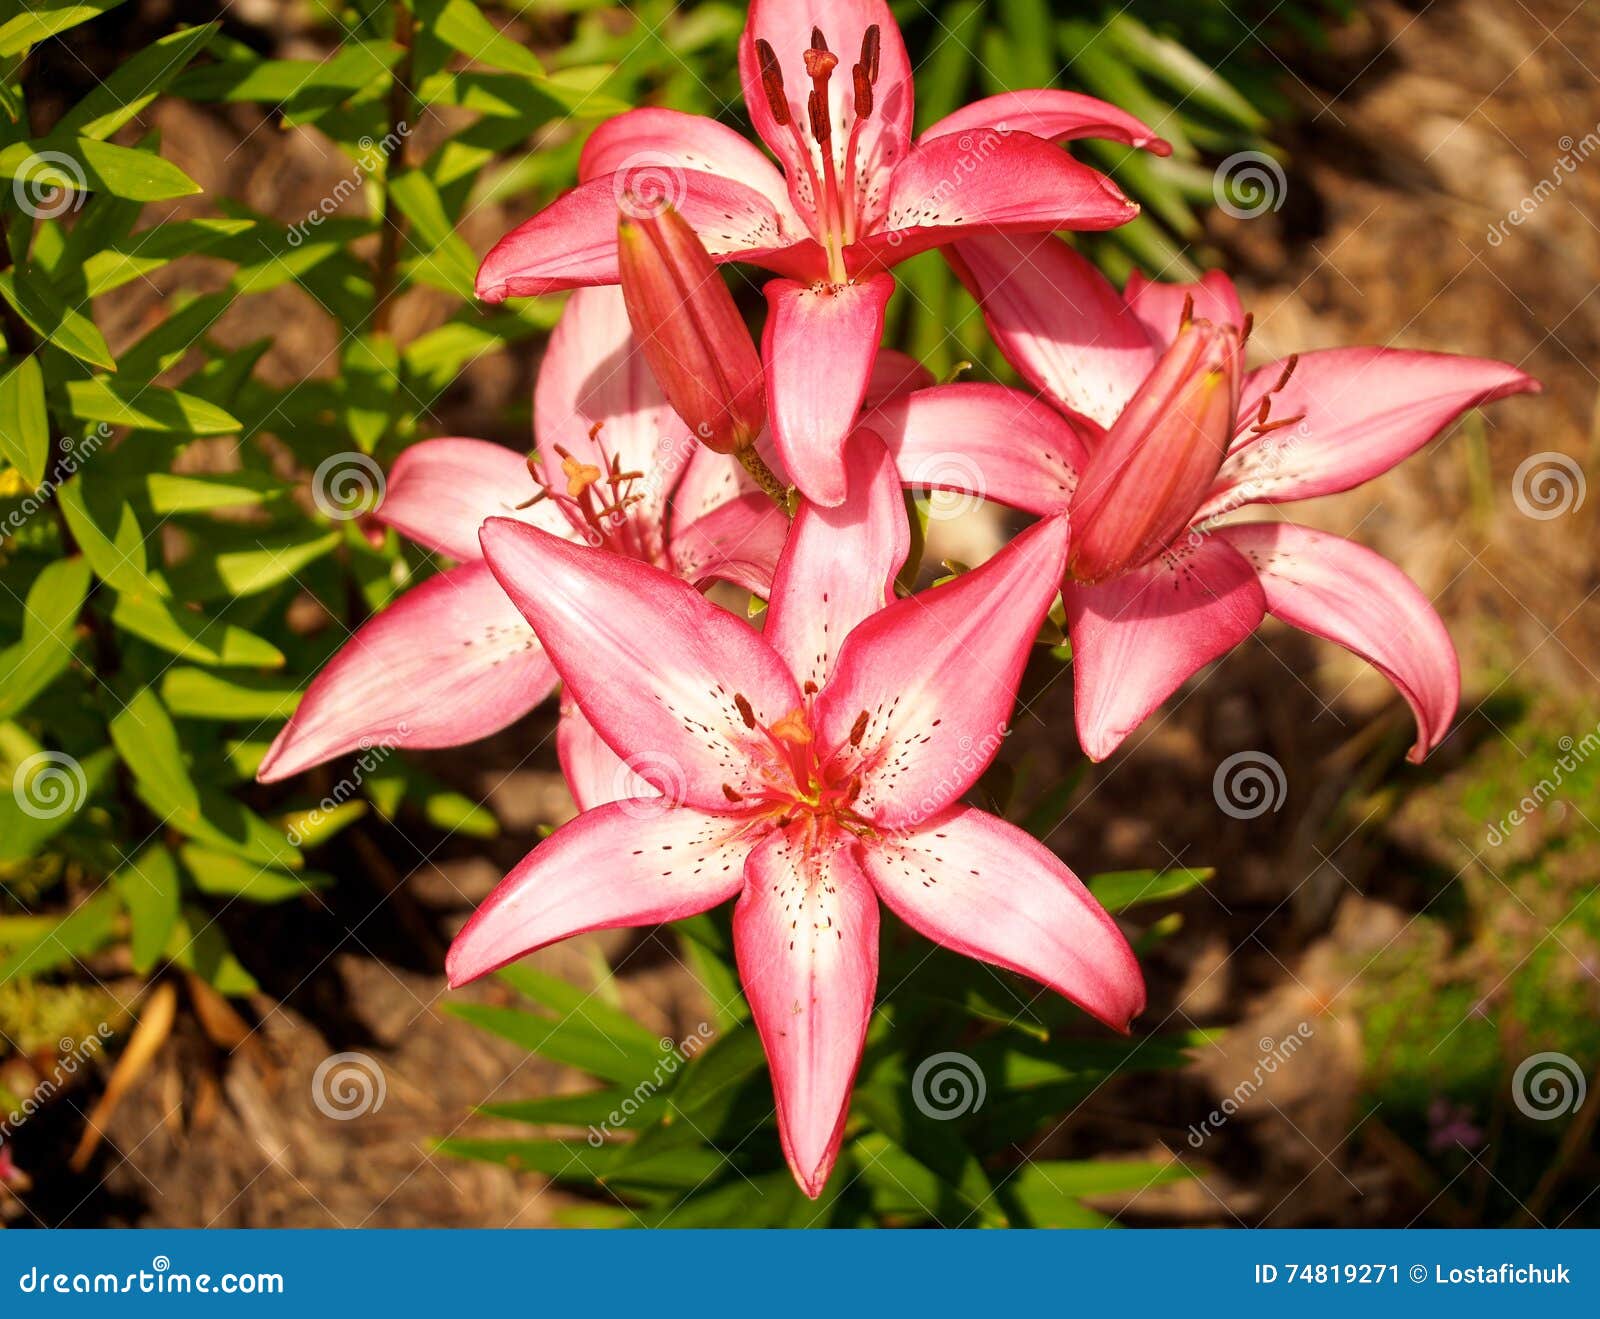 Lily or Lilium Species in Bloom Stock Image - Image of vegetation ...